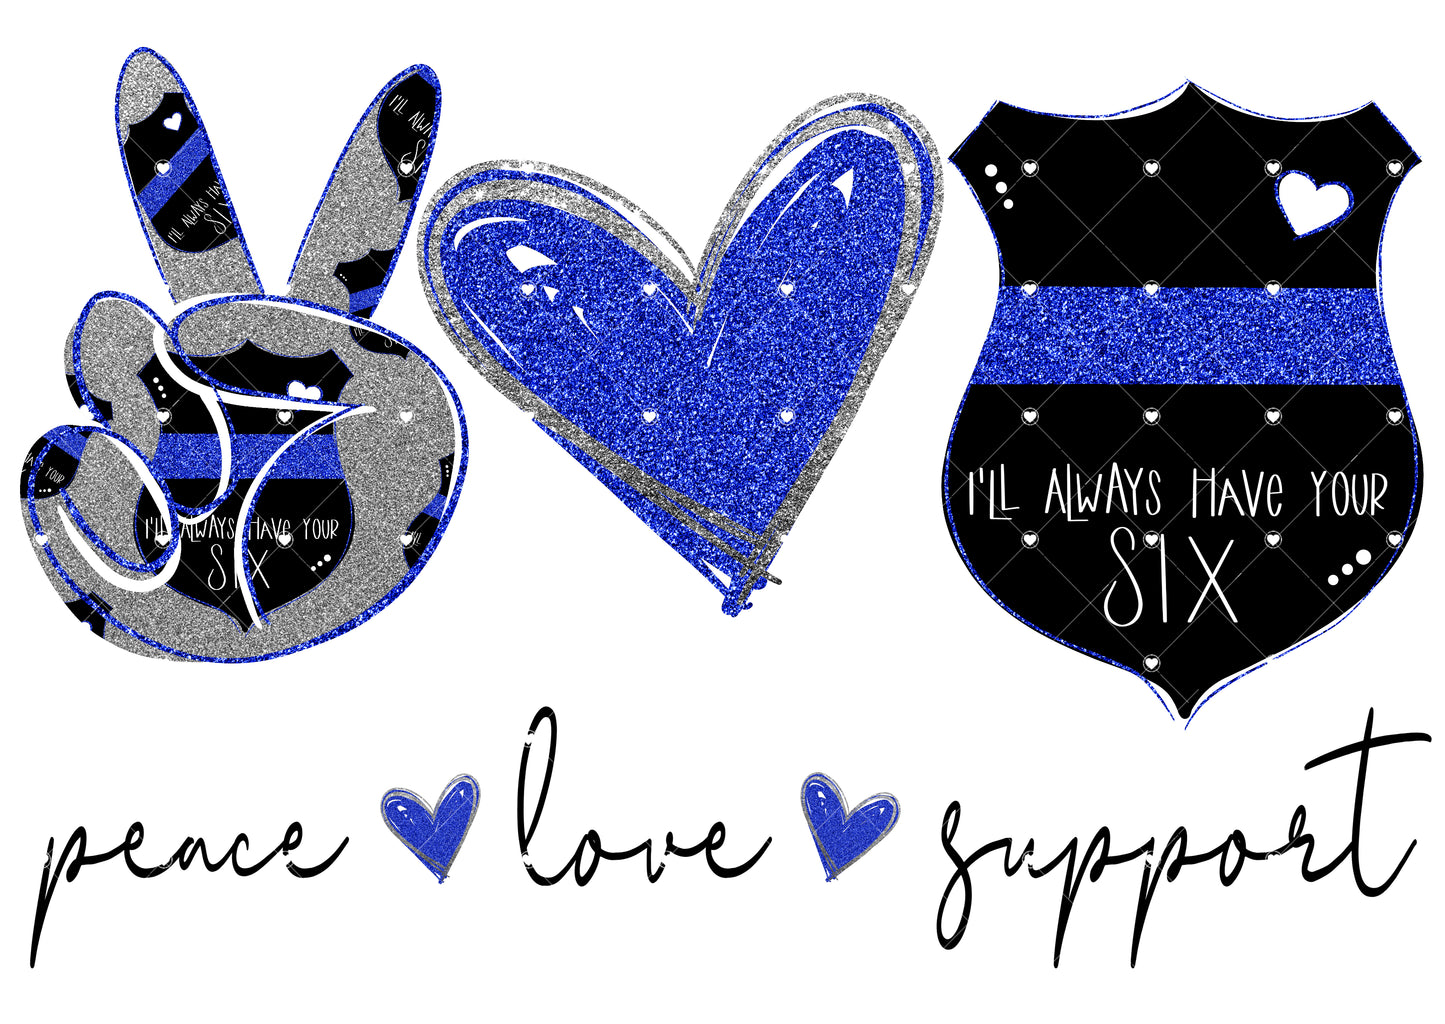 Peace Love Support Police 2 Ready To Press Sublimation Transfer